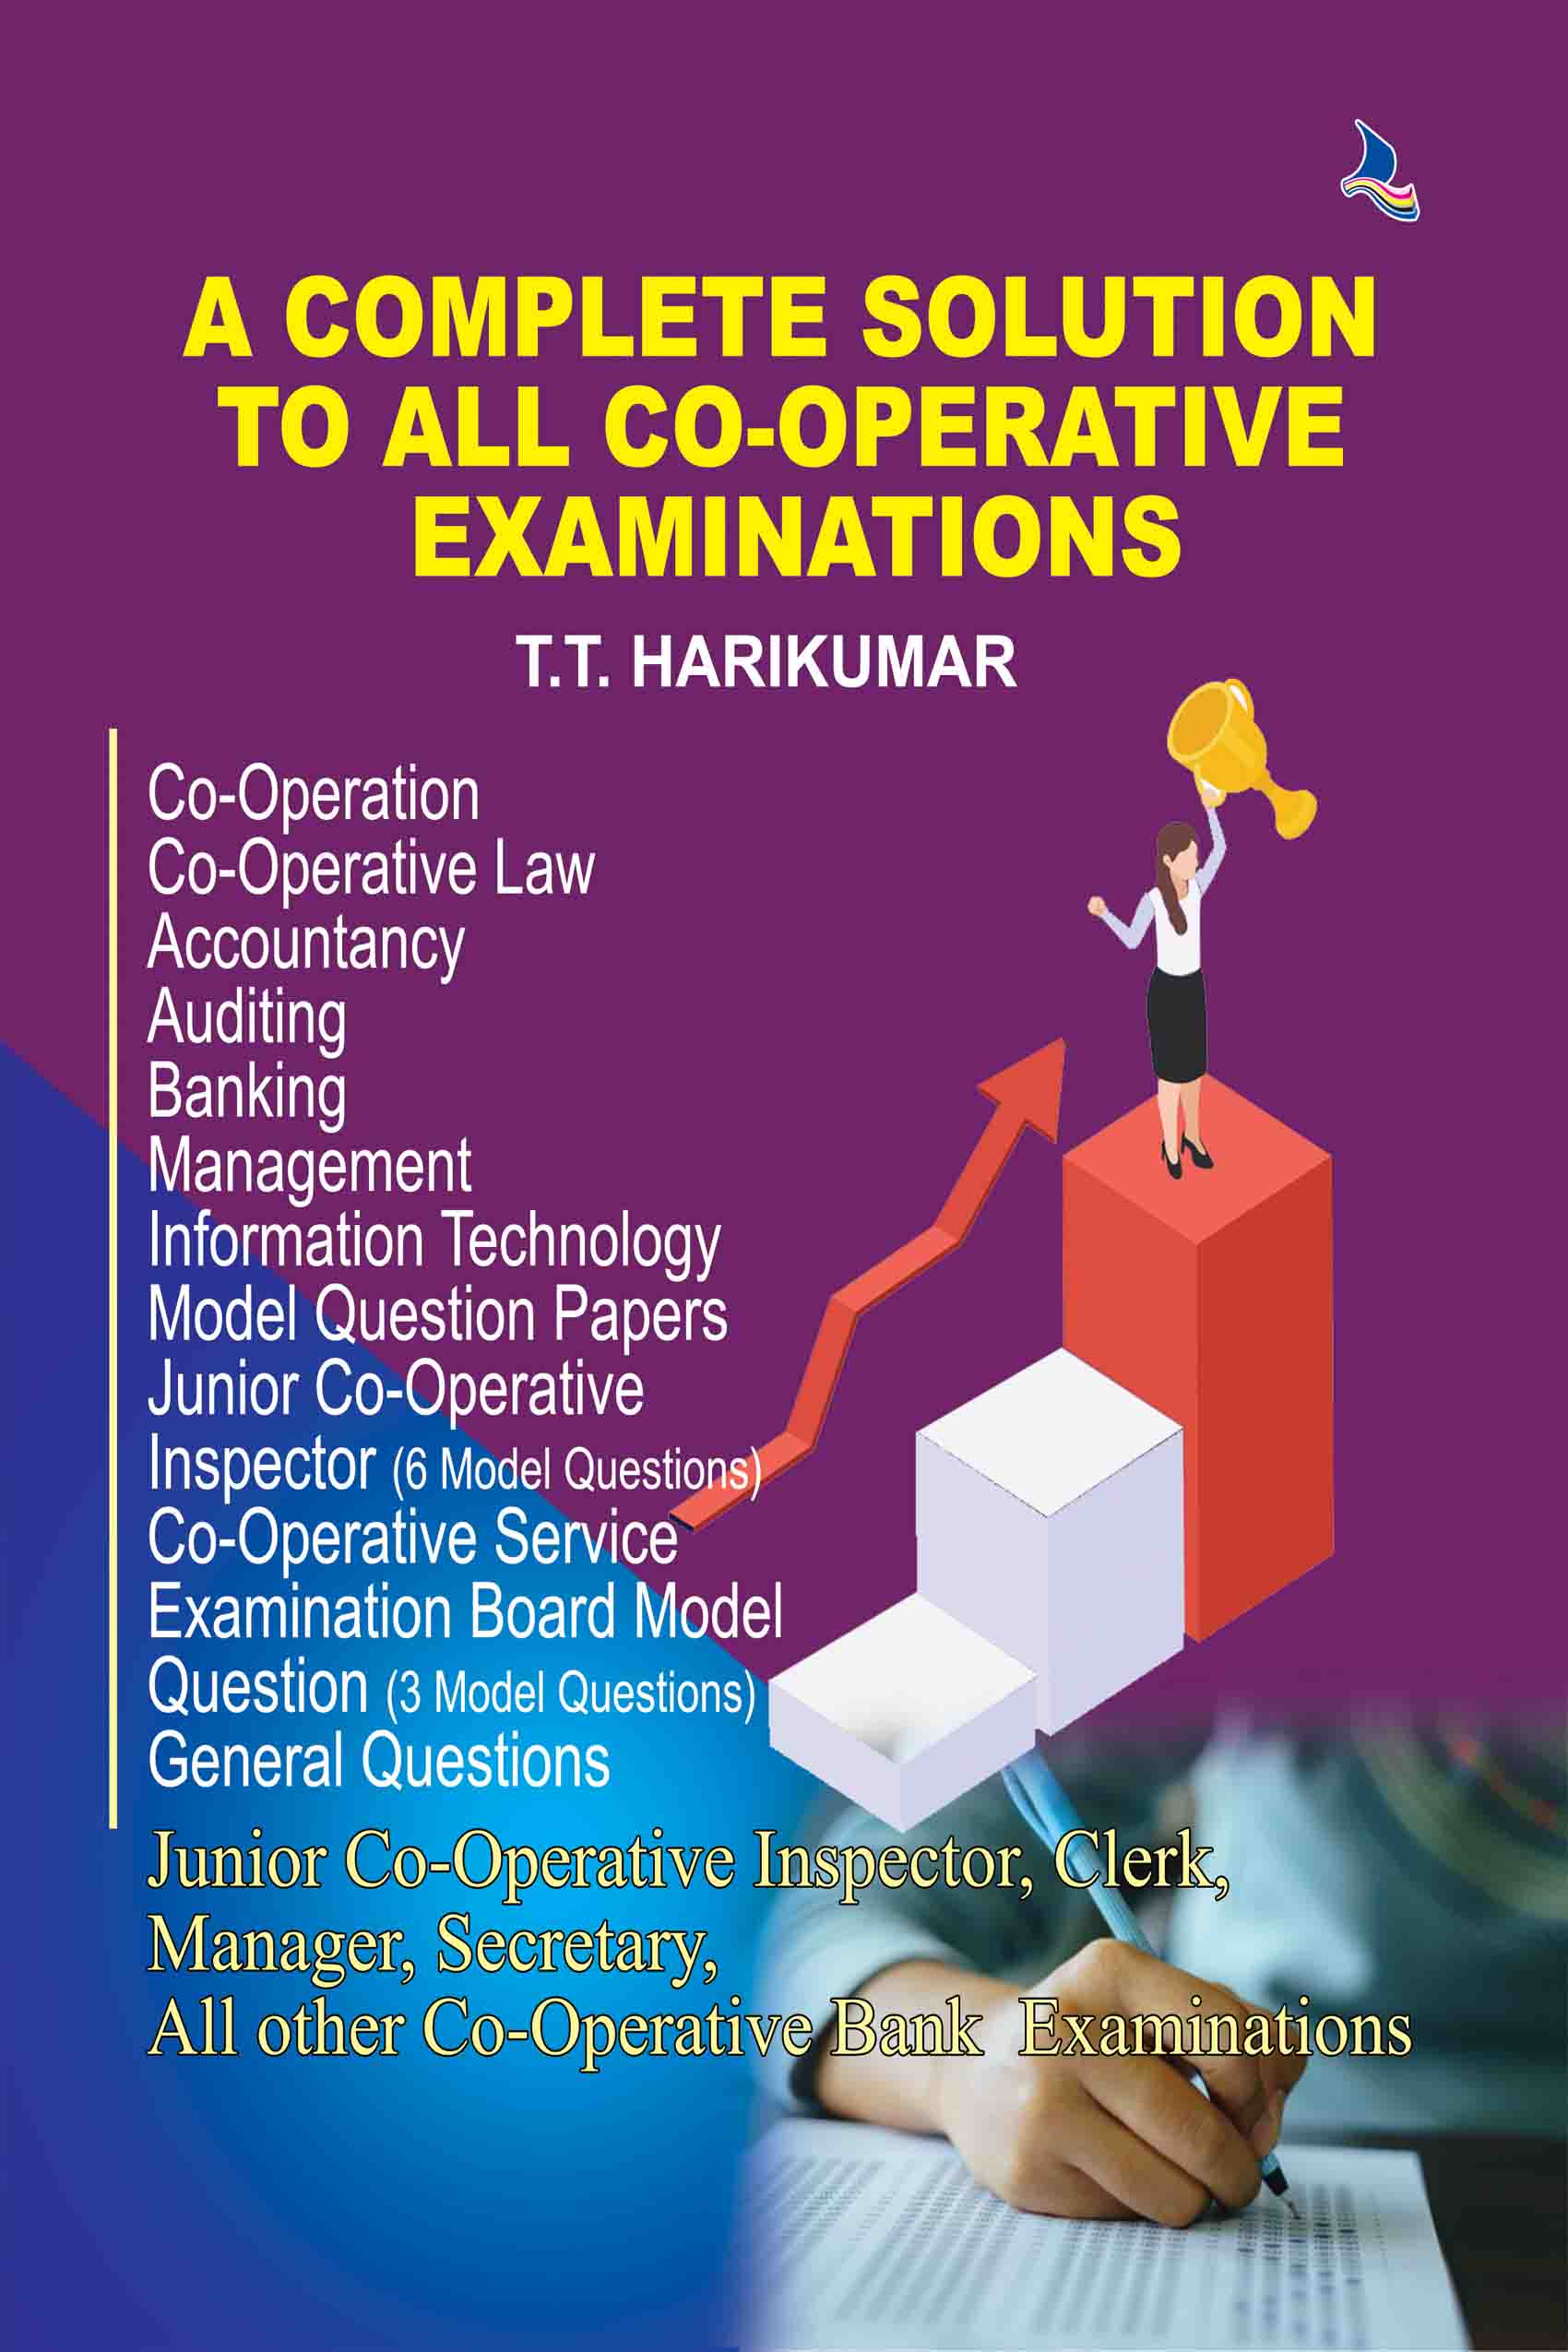 A Complete Solution to All Co-Operative Examinations